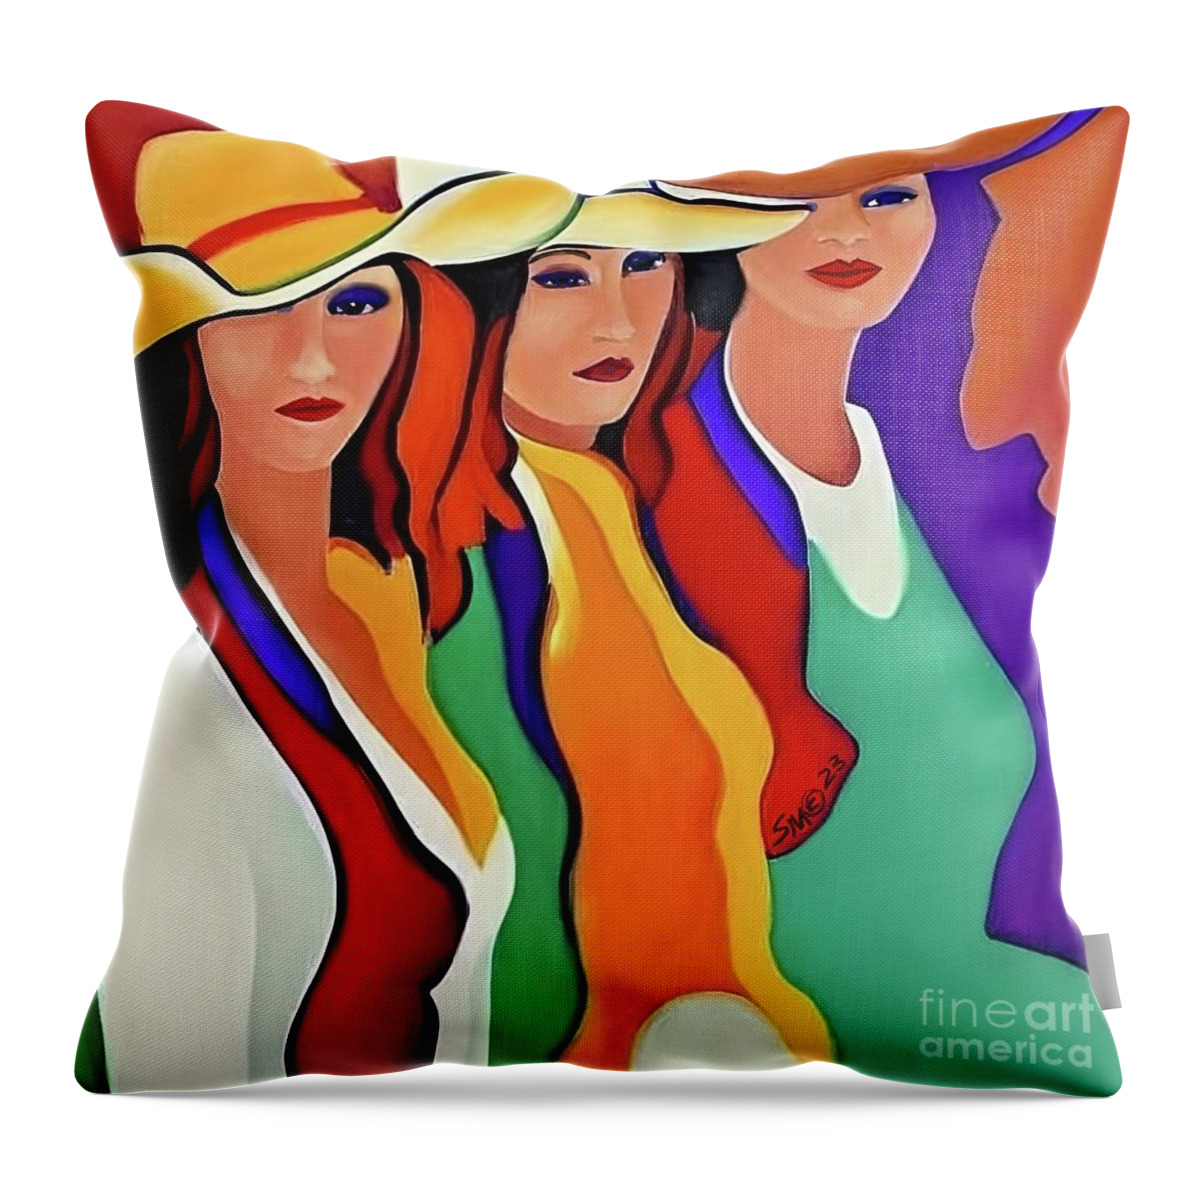 Figurative Throw Pillow featuring the digital art Three Texas Ladies by Stacey Mayer